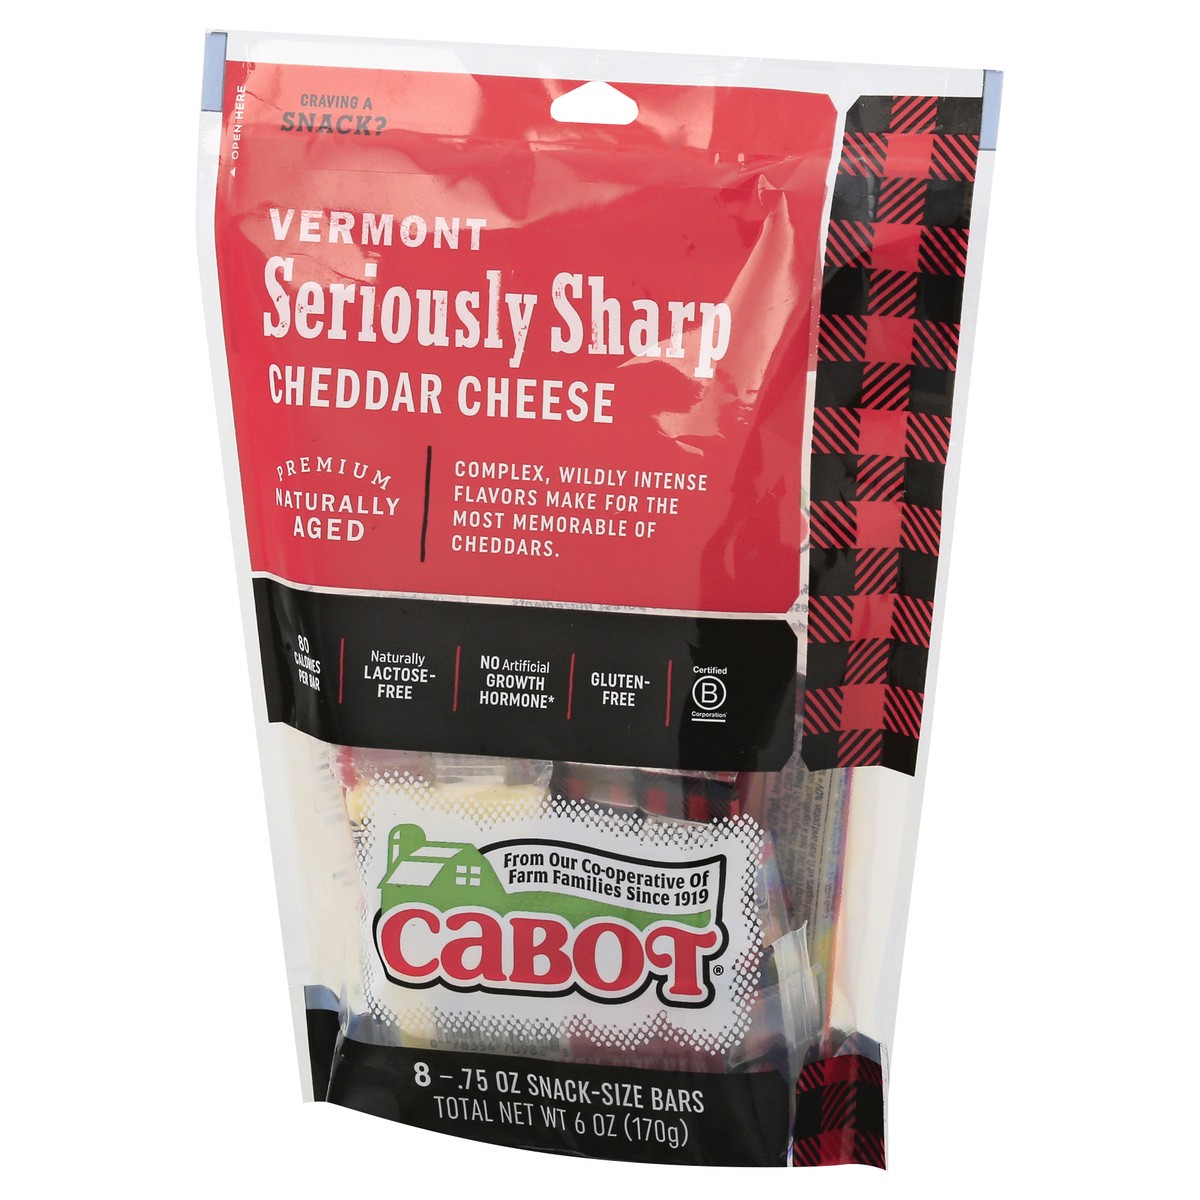 slide 2 of 10, Cabot Vermont Seriously Sharp Cheddar Cheese 8-0.75 oz Packs, 8 ct